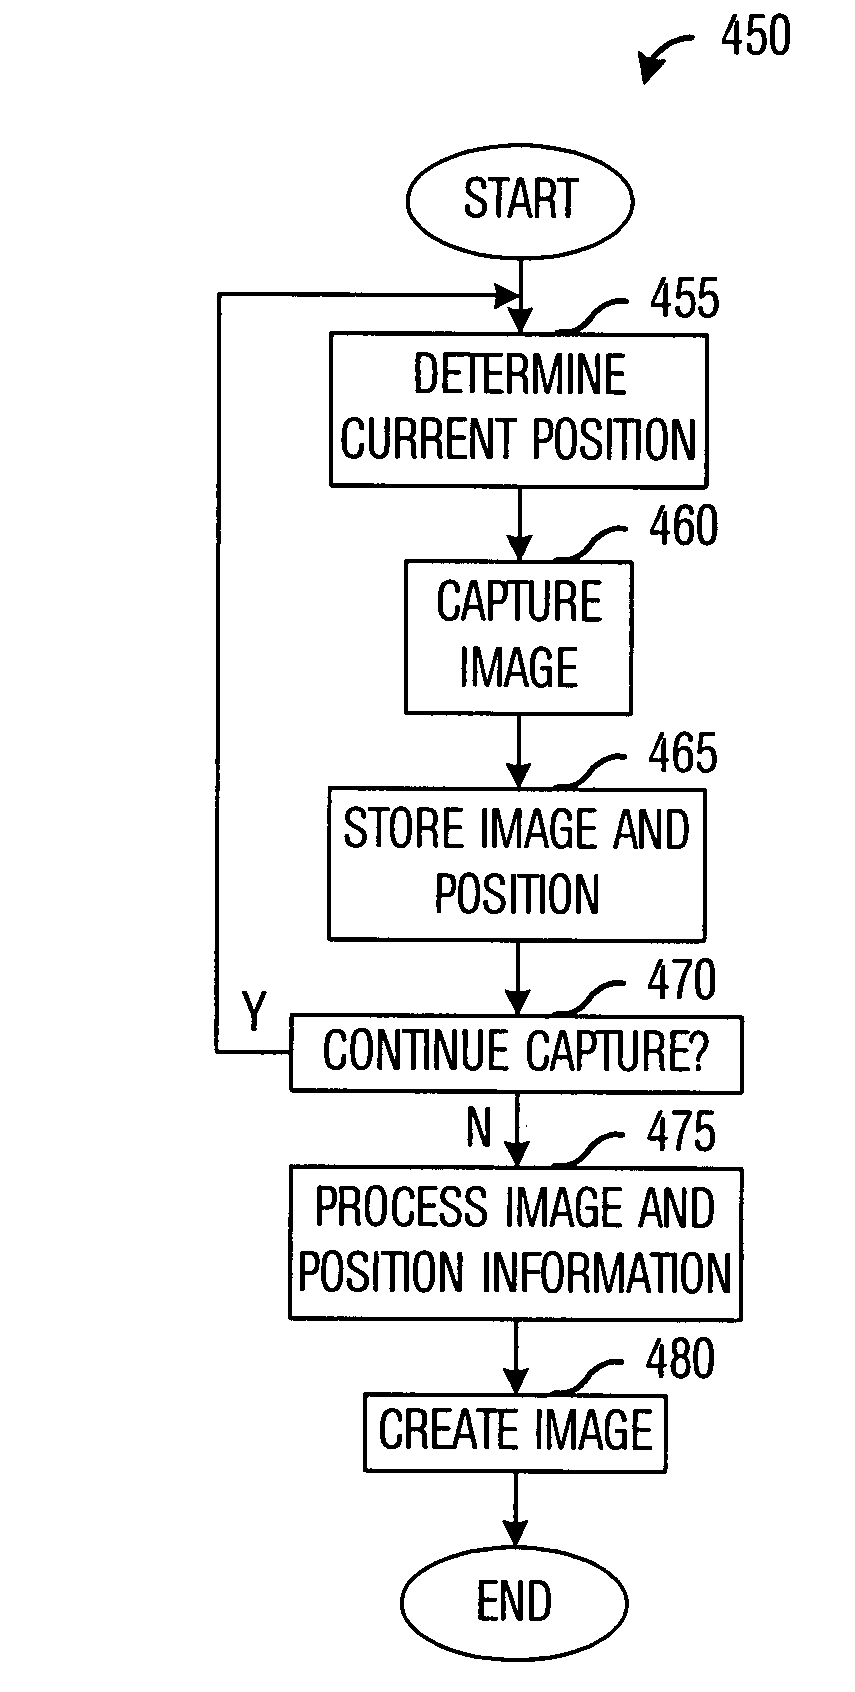 System and method for displaying and capturing images